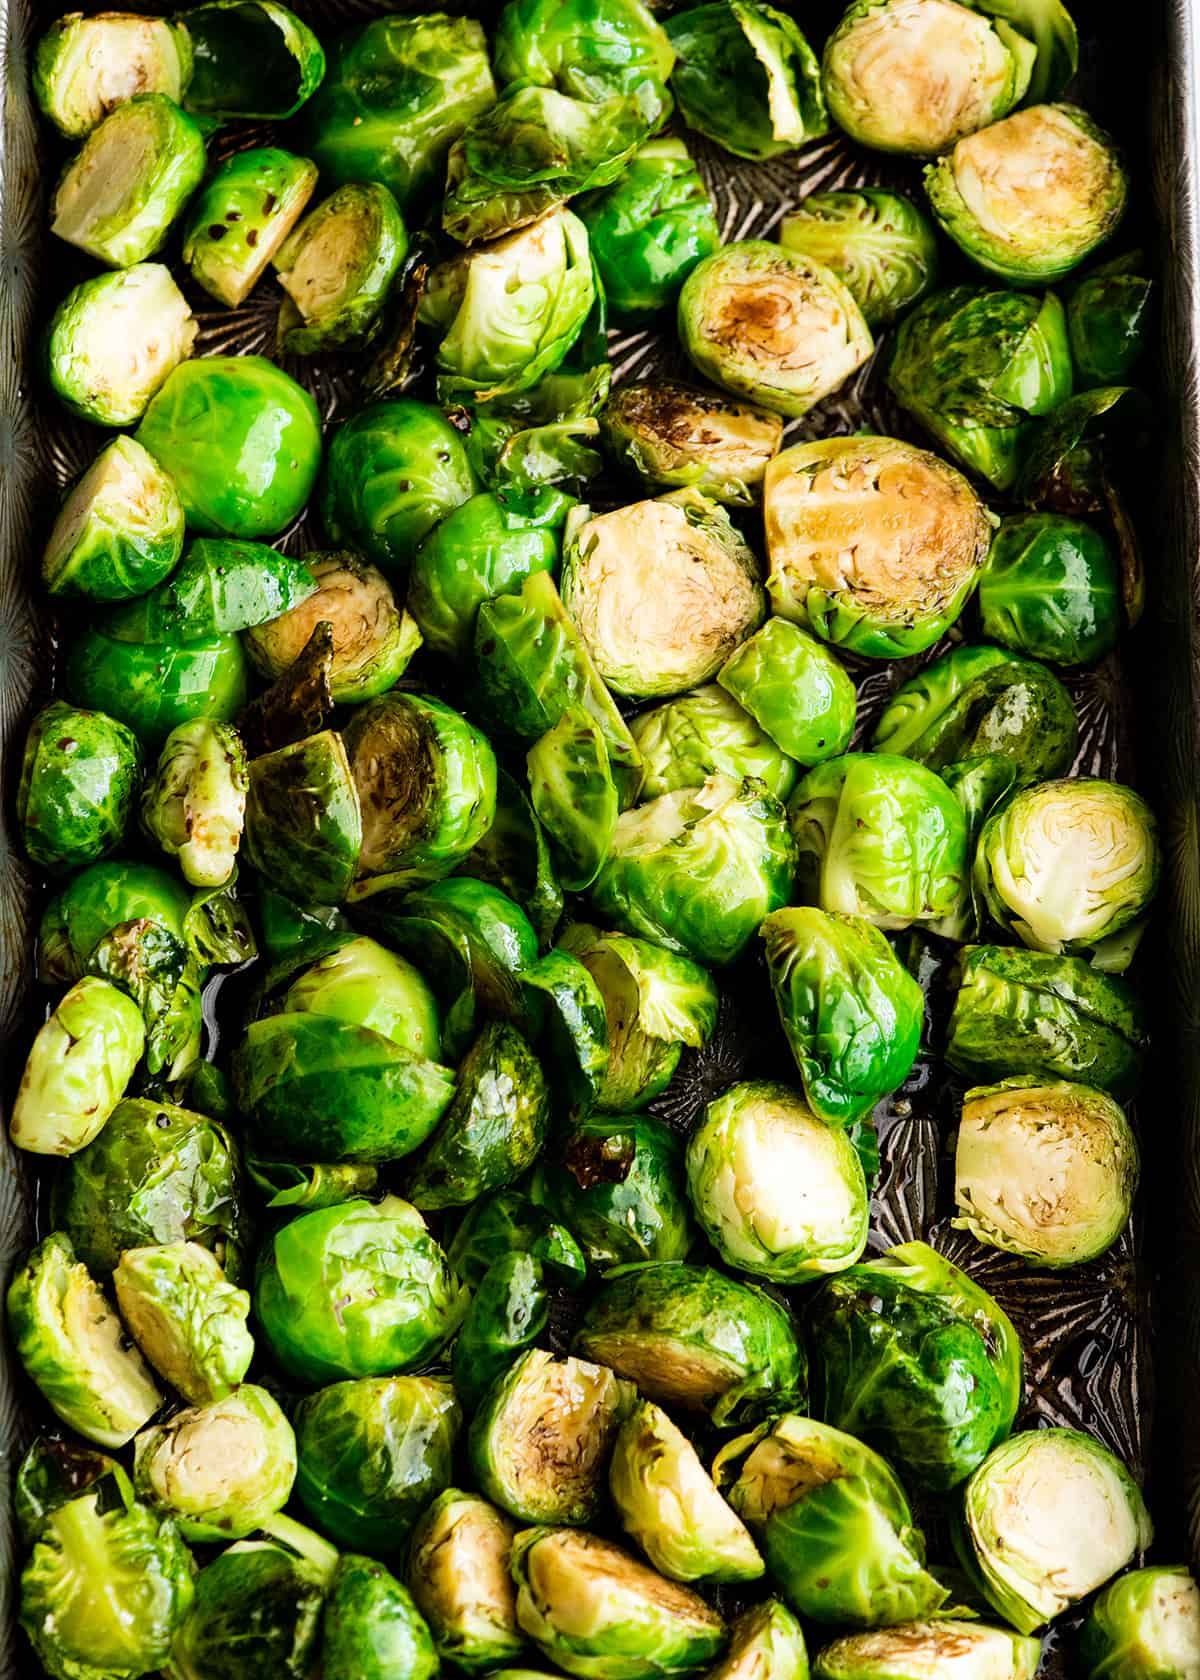 partially roasted Brussels sprouts after adding balsamic glaze